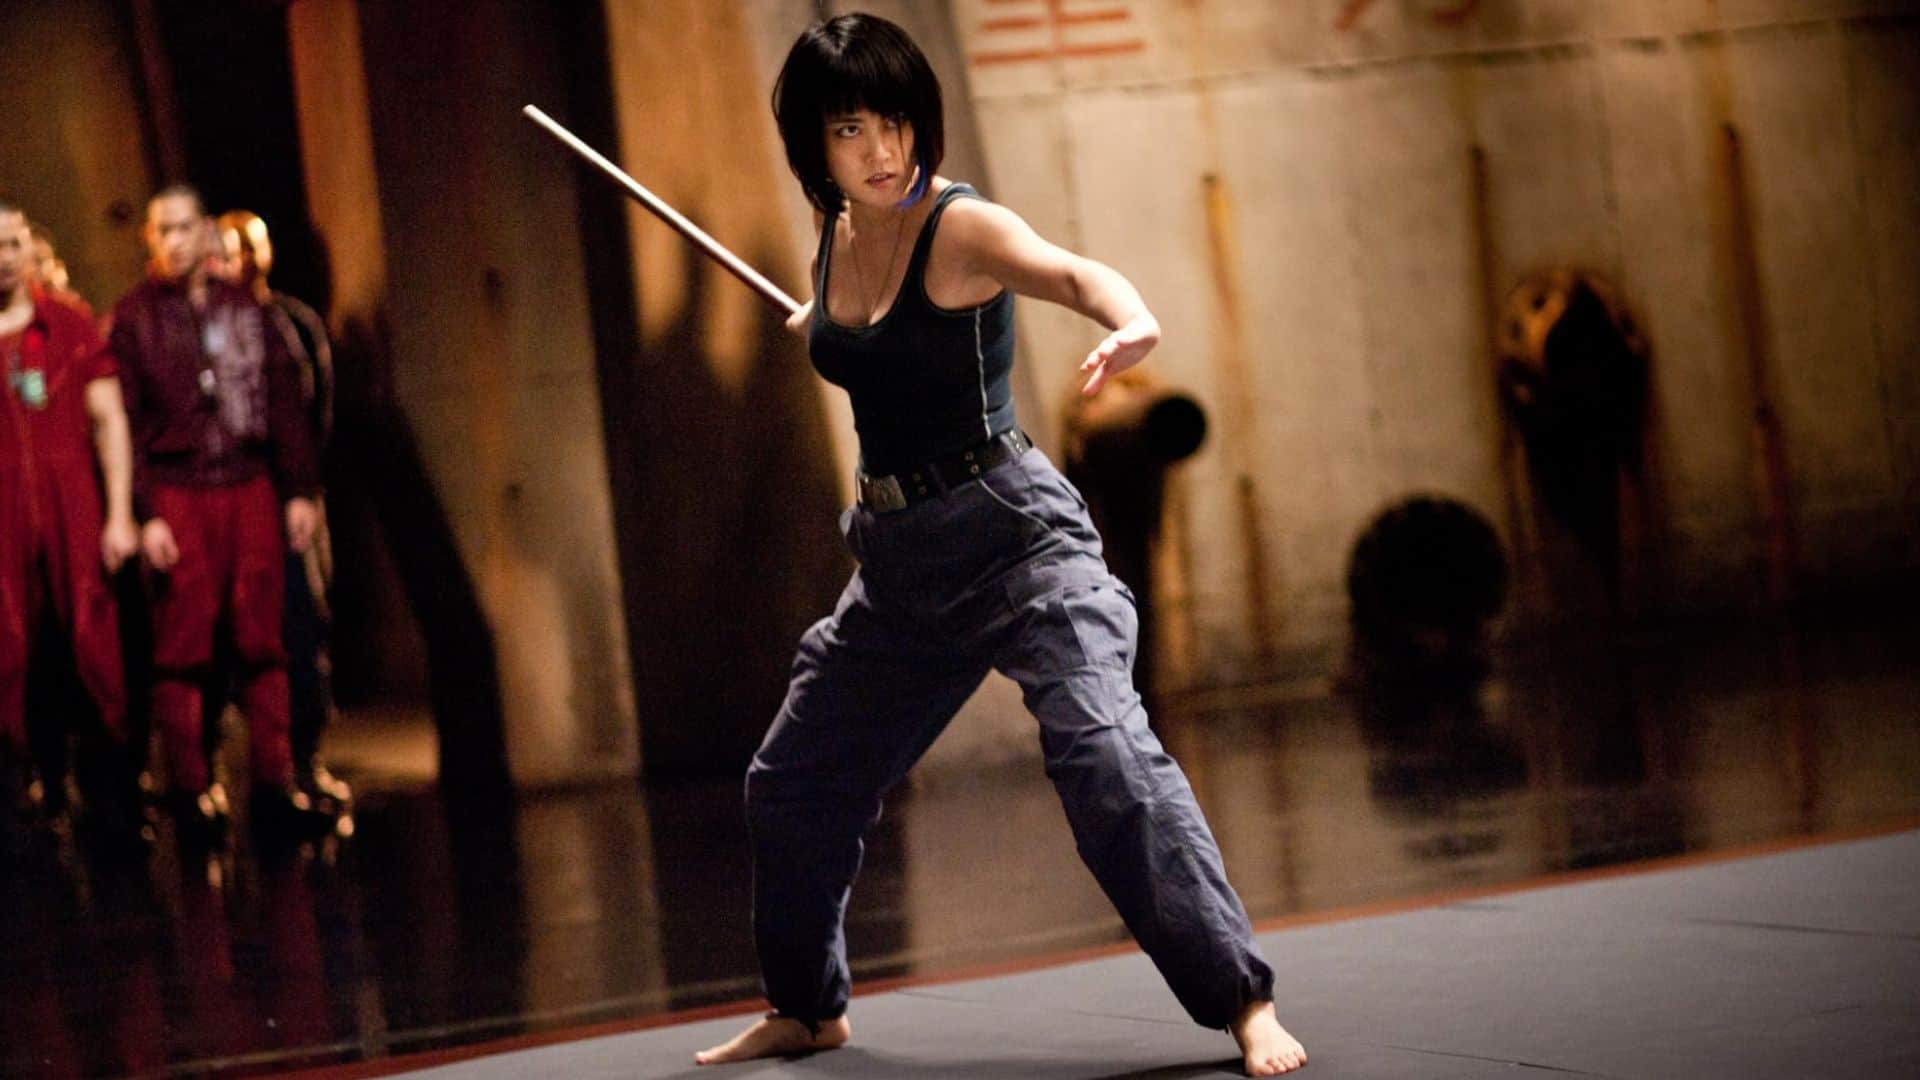 A woman on a sparring mat training with a wooden sword in this image from Legendary Entertainment.